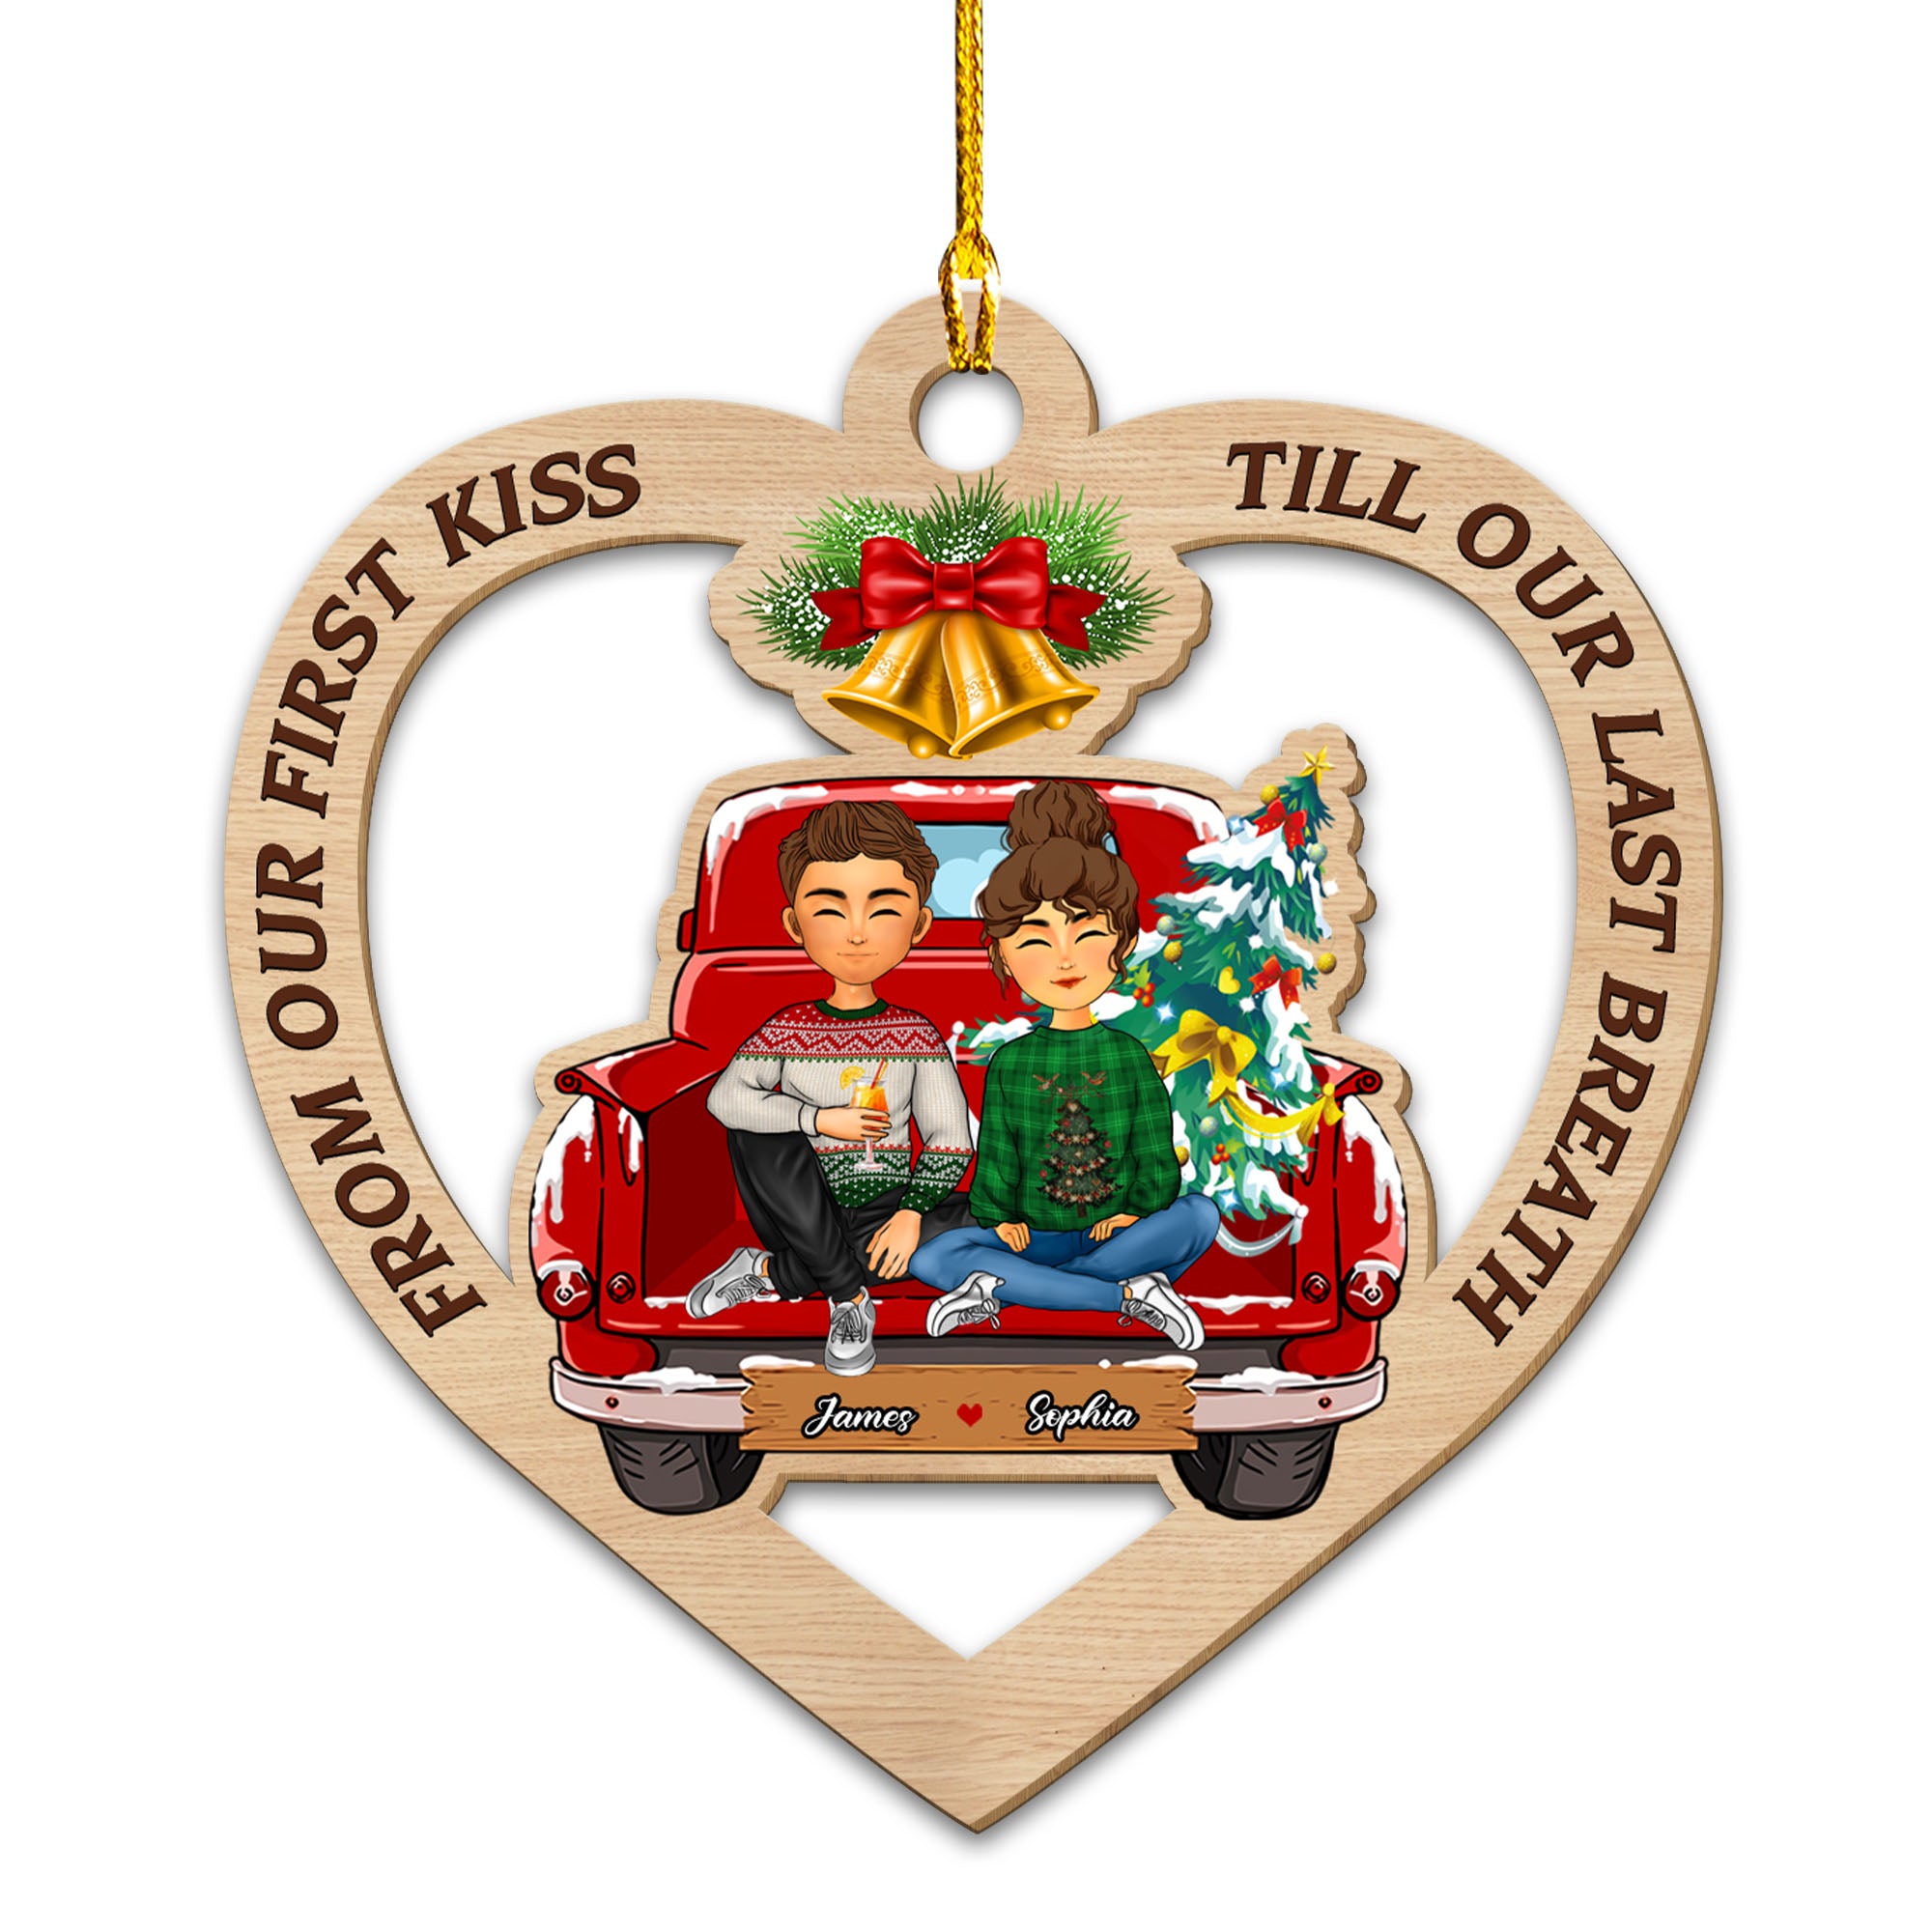 From Our First Kiss Christmas Ornament - Custom Shape Wood Ornament - 1 Layered Wood Ornament